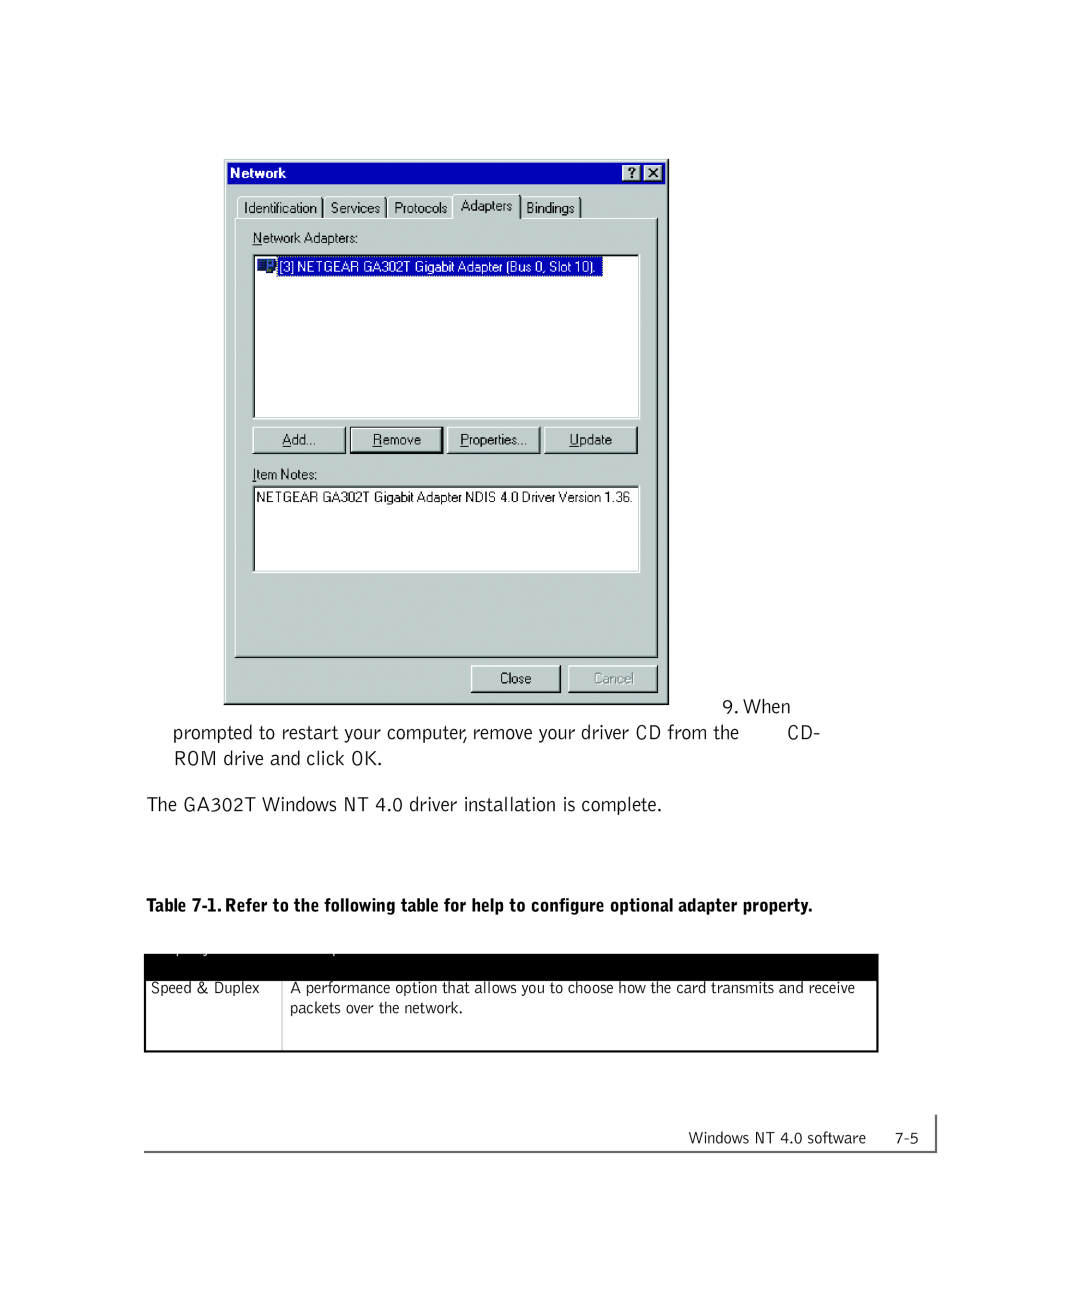 NETGEAR manual When, The GA302T Windows NT 4.0 driver installation is complete 